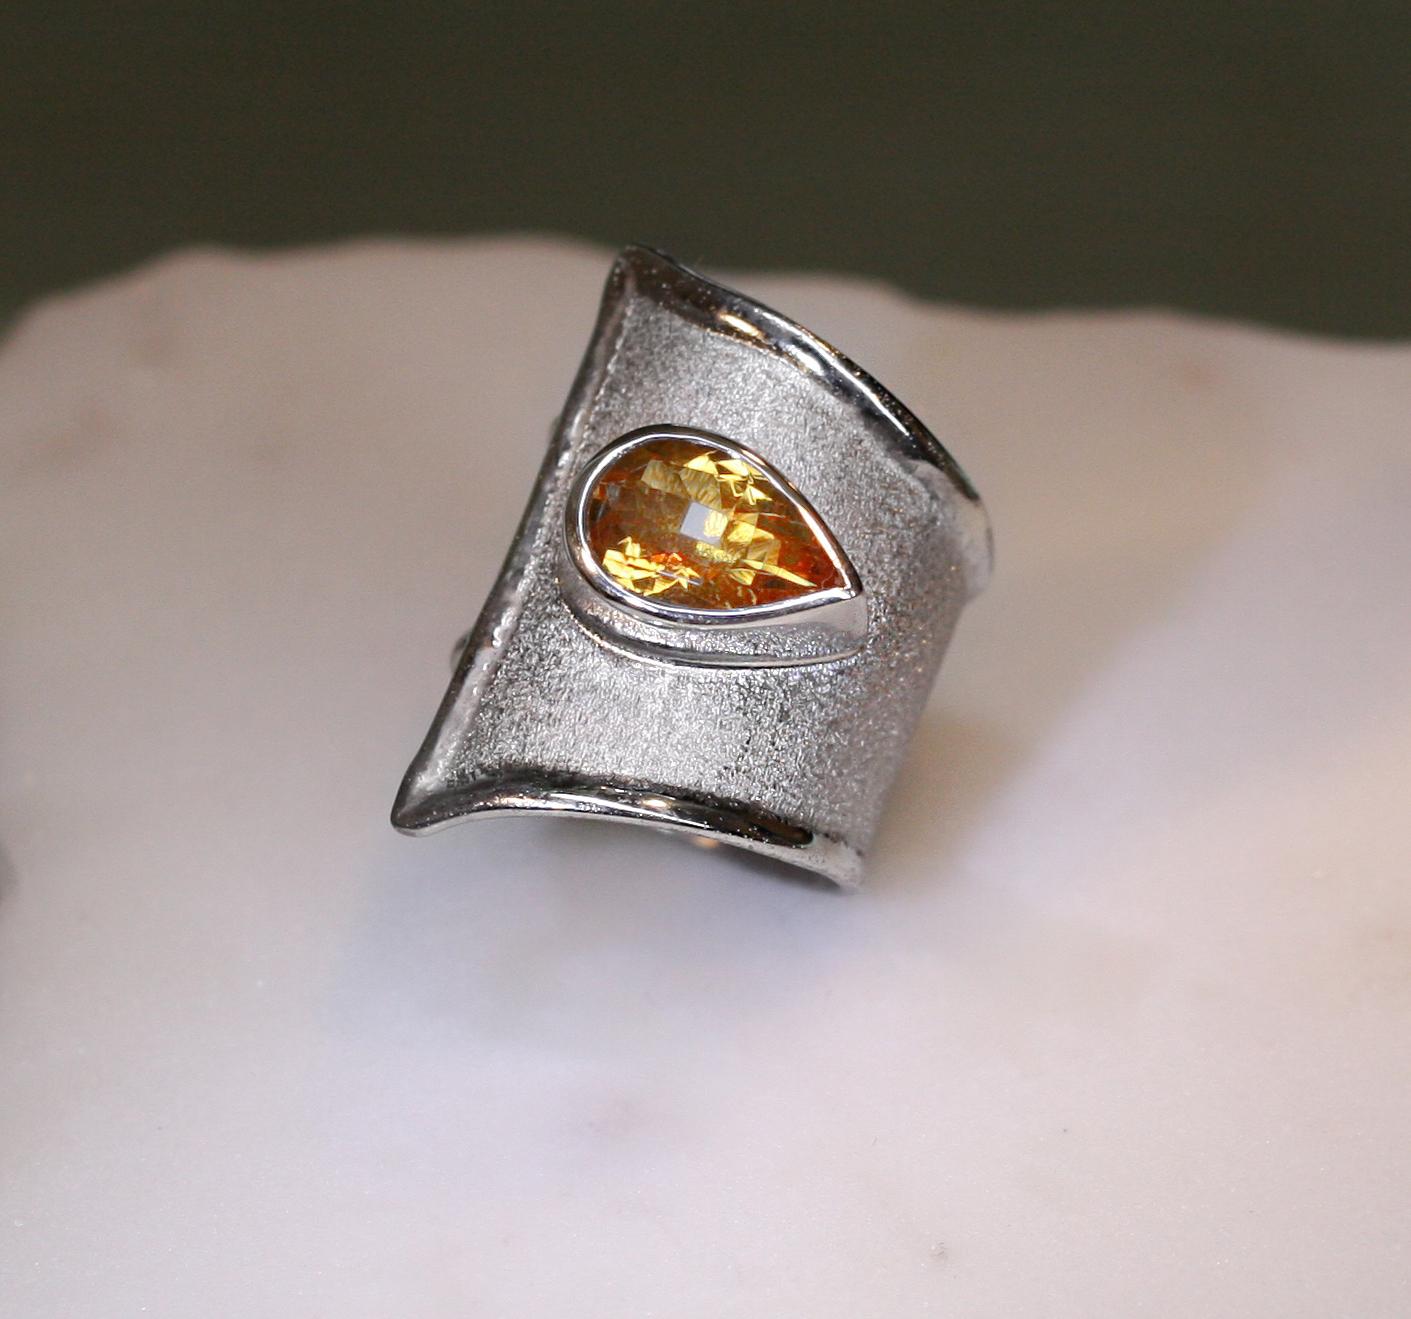 Yianni Creations adjustable wide band ring handcrafted in Greece from fine silver 950 purity and plated with palladium to protect it from the tarnish is all custom-made. This gorgeous ring features 3.80 Carat teardrop chape Citrine complemented by